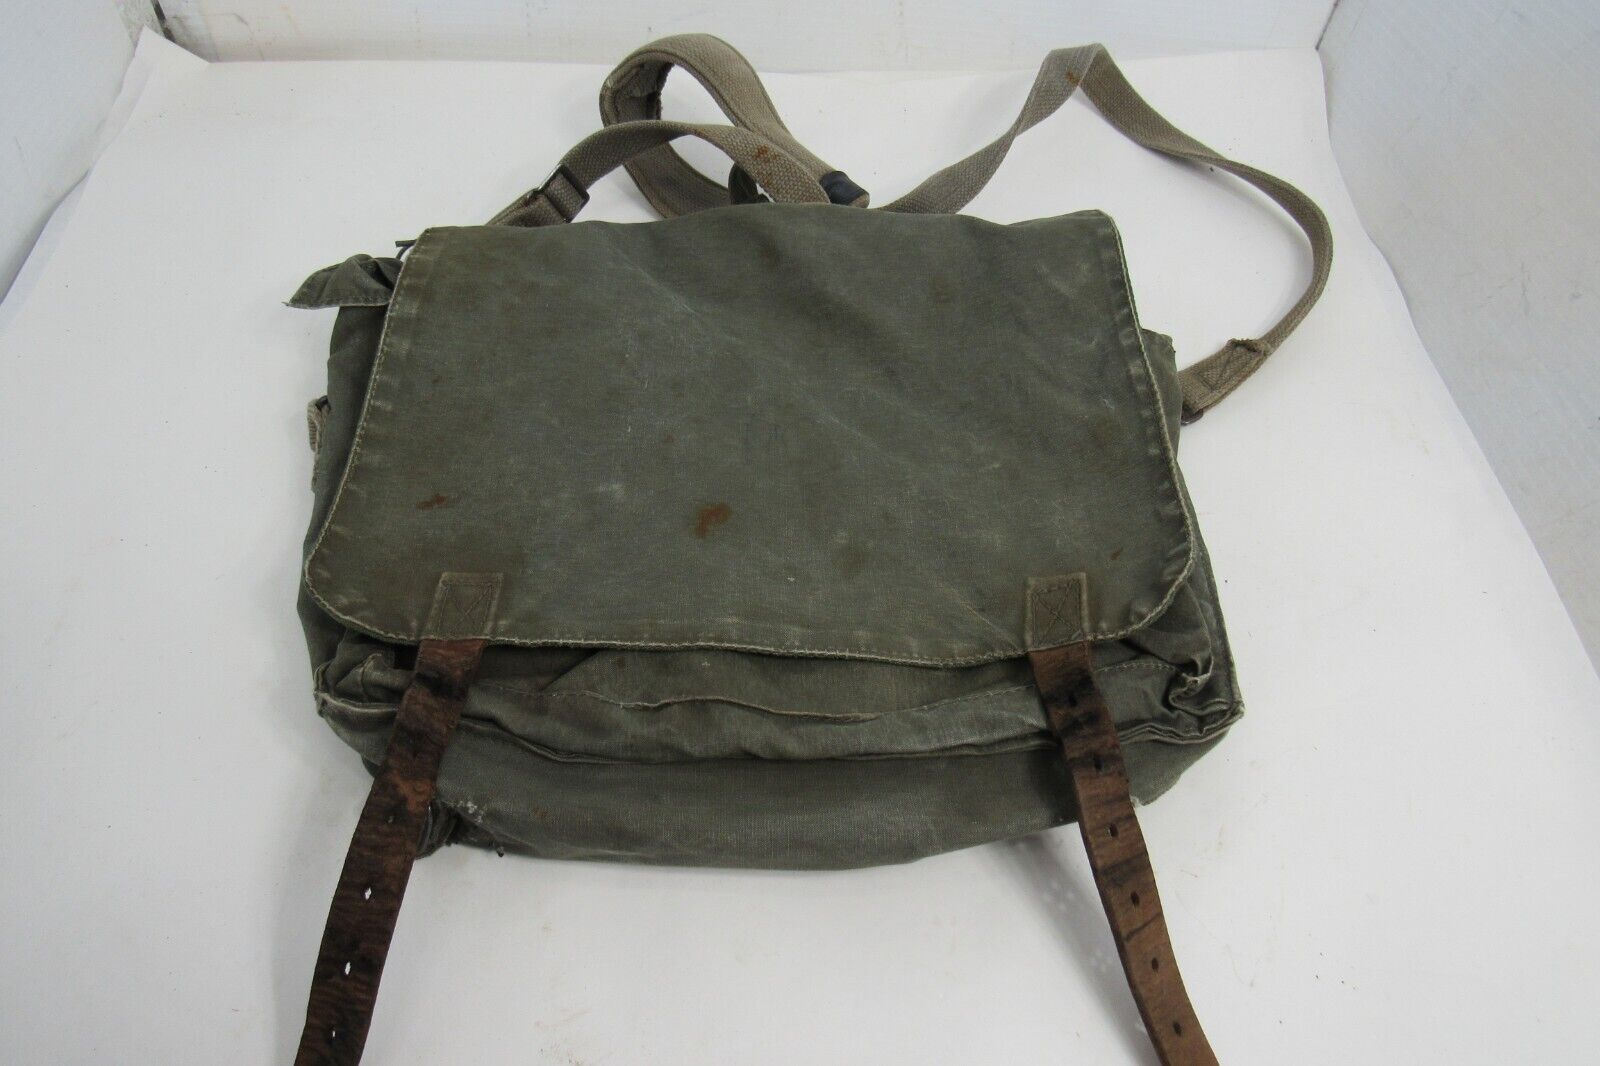 Vintage Army Messenger Bag Tote Satchel Military Green Field Leather Straps